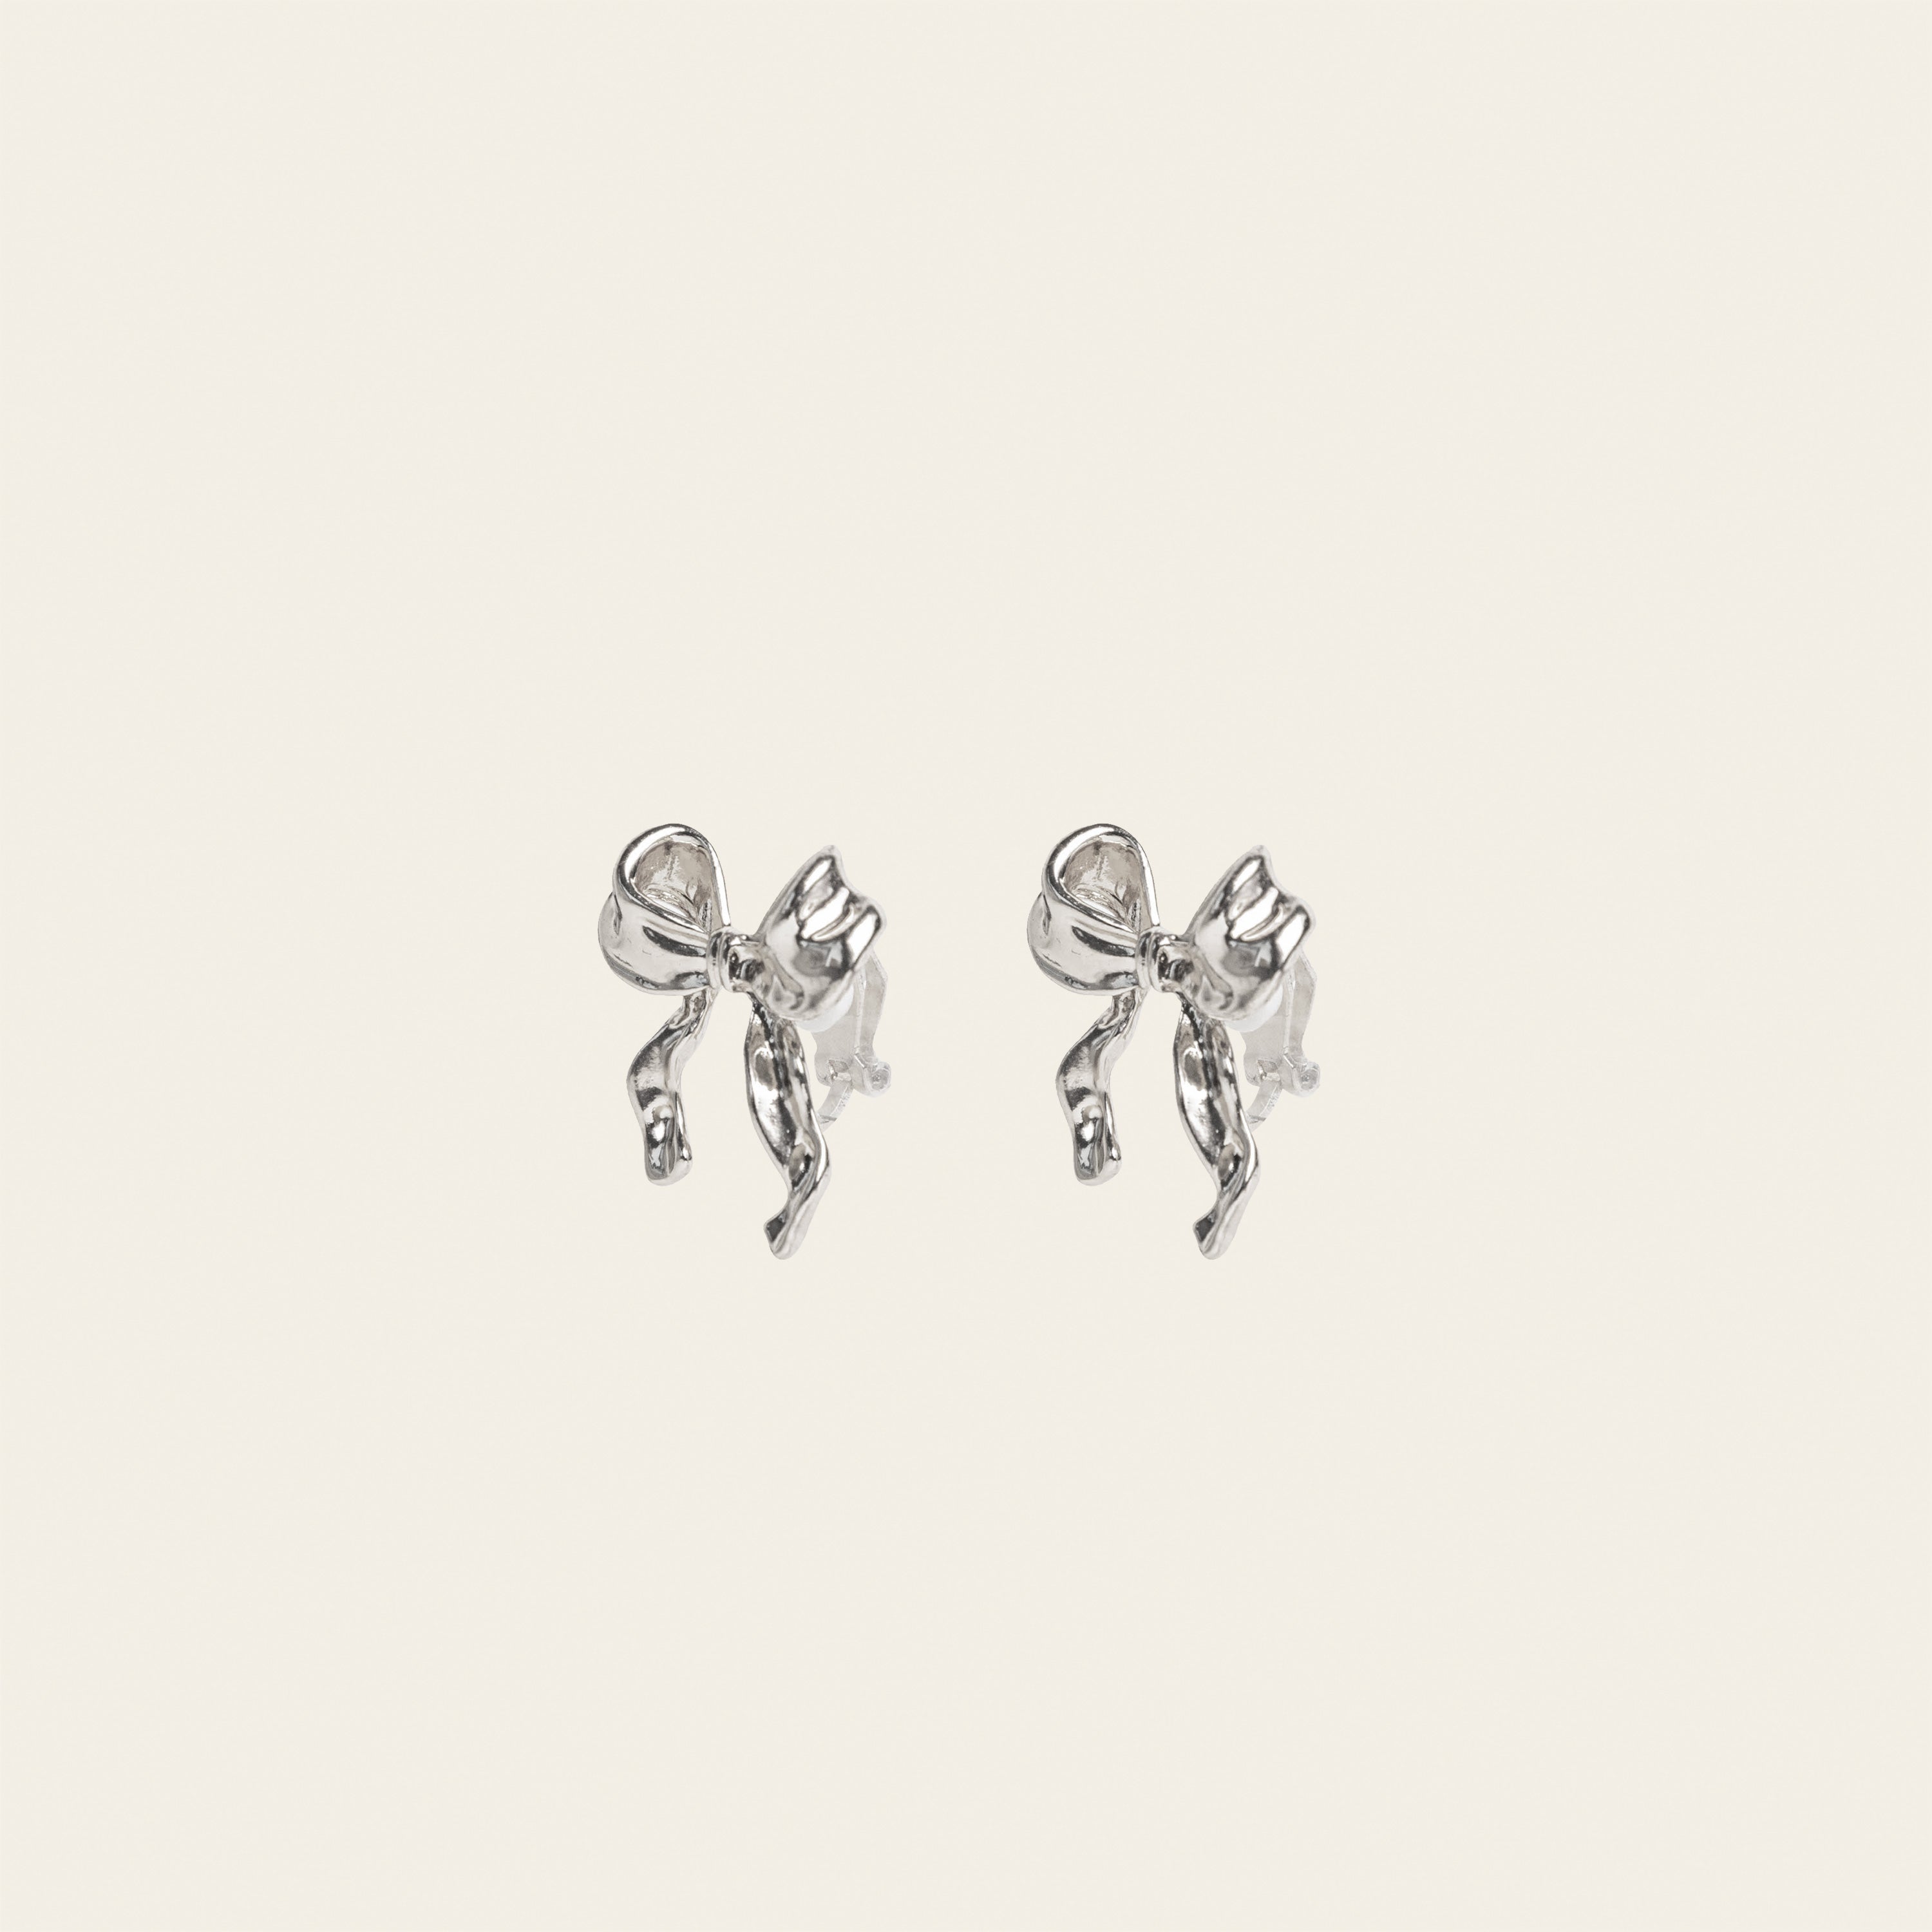 Image of the Charlie Clip On Earrings. Our expertly crafted earrings provide a 24-hour hold and adjustable fit for sensitive or stretched ears. Elevate your style with effortless elegance.